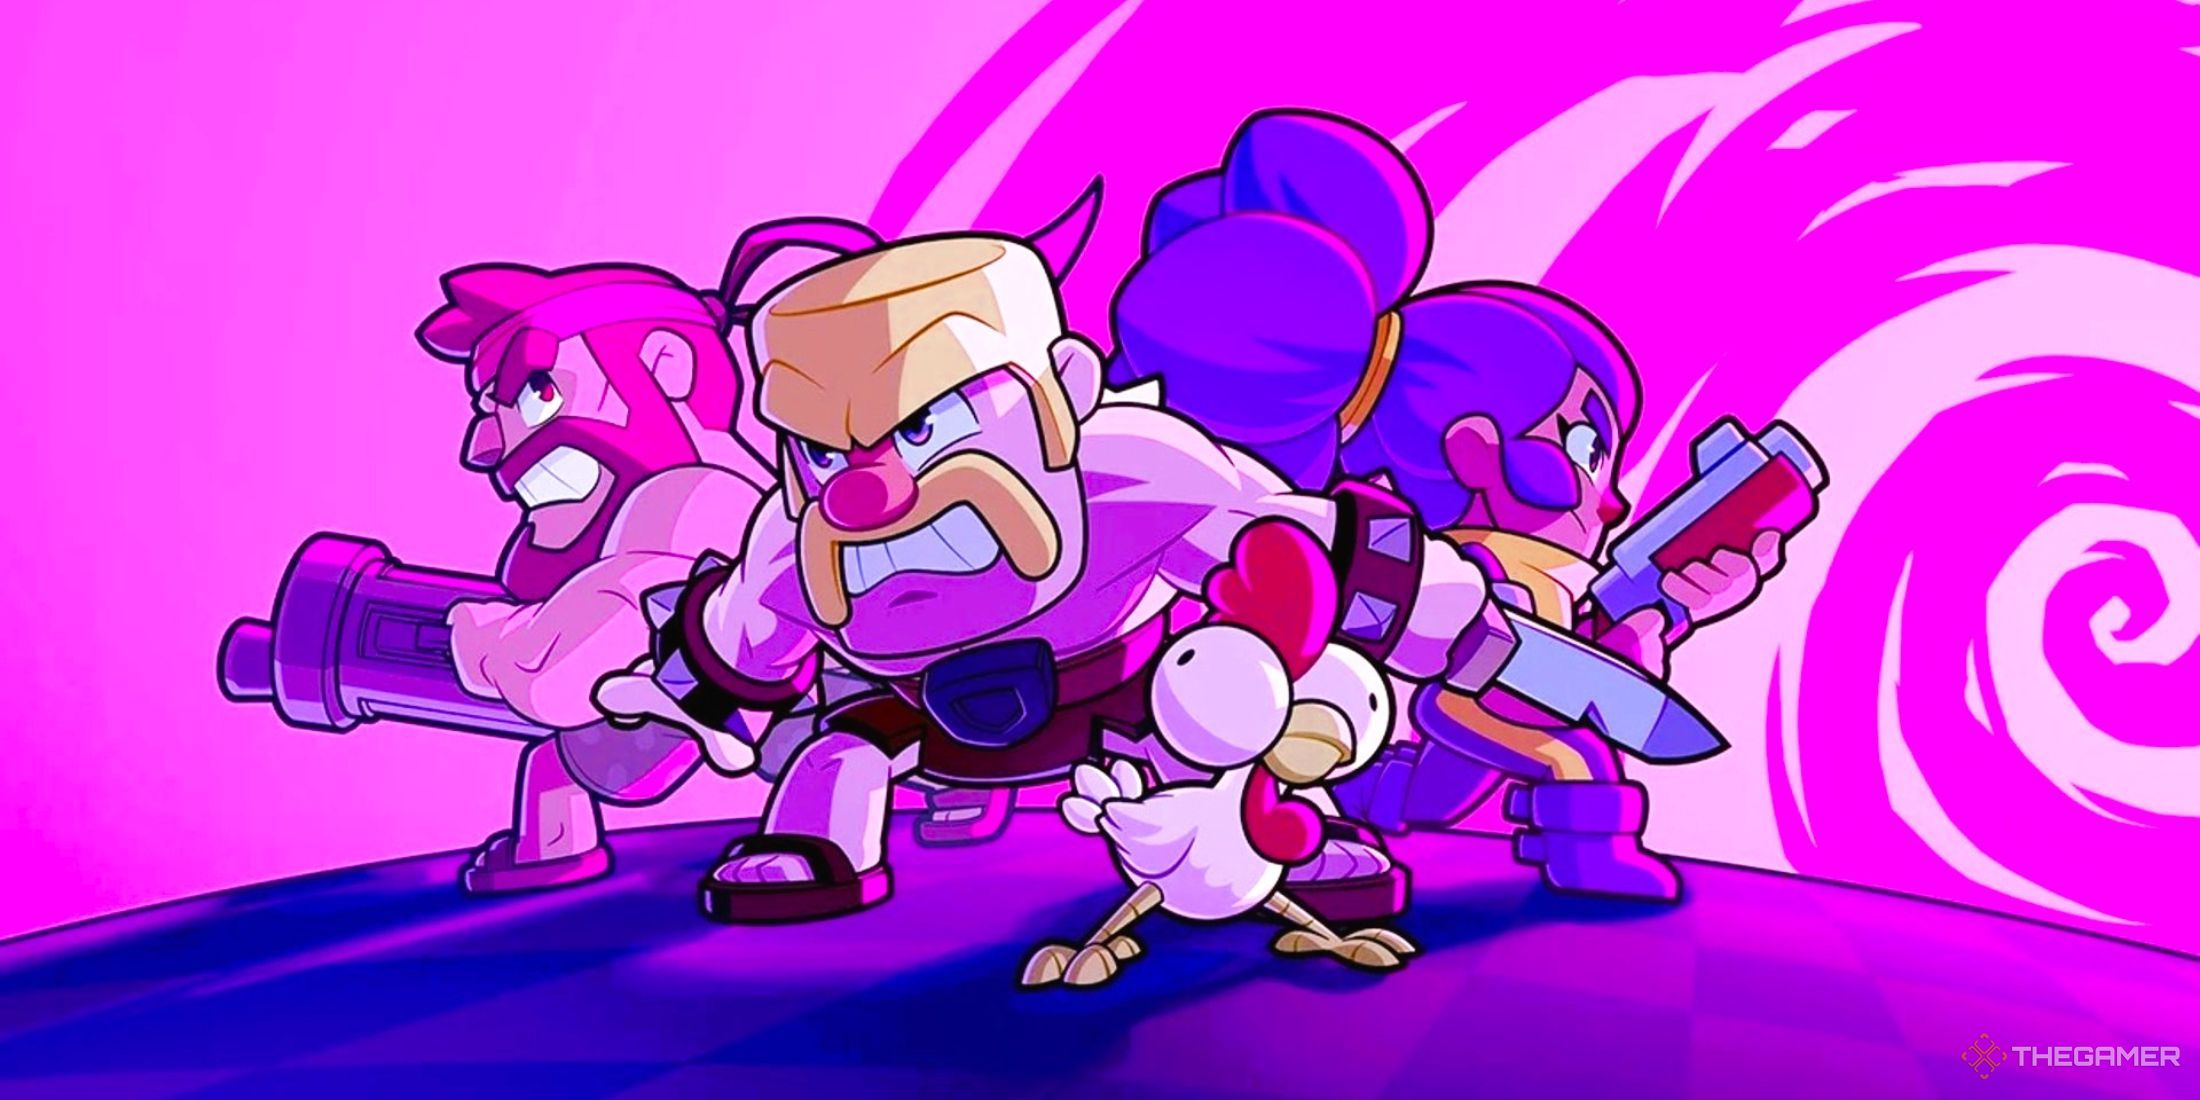 Four characters from Squad busters standing next to each other, covering their backs, in a purple background.